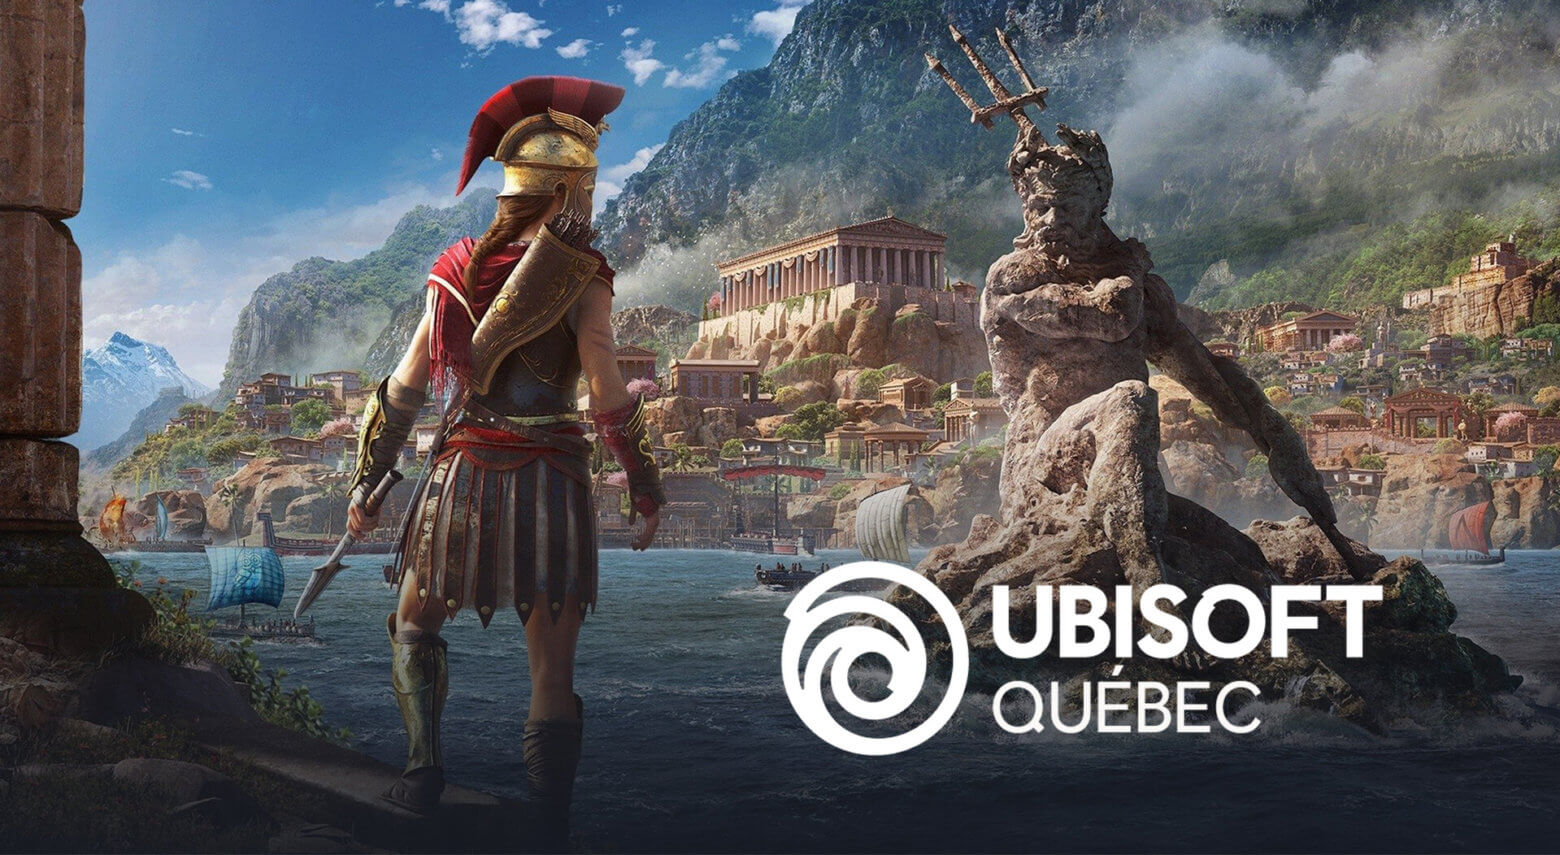 Work and logo from Ubisoft Quebec